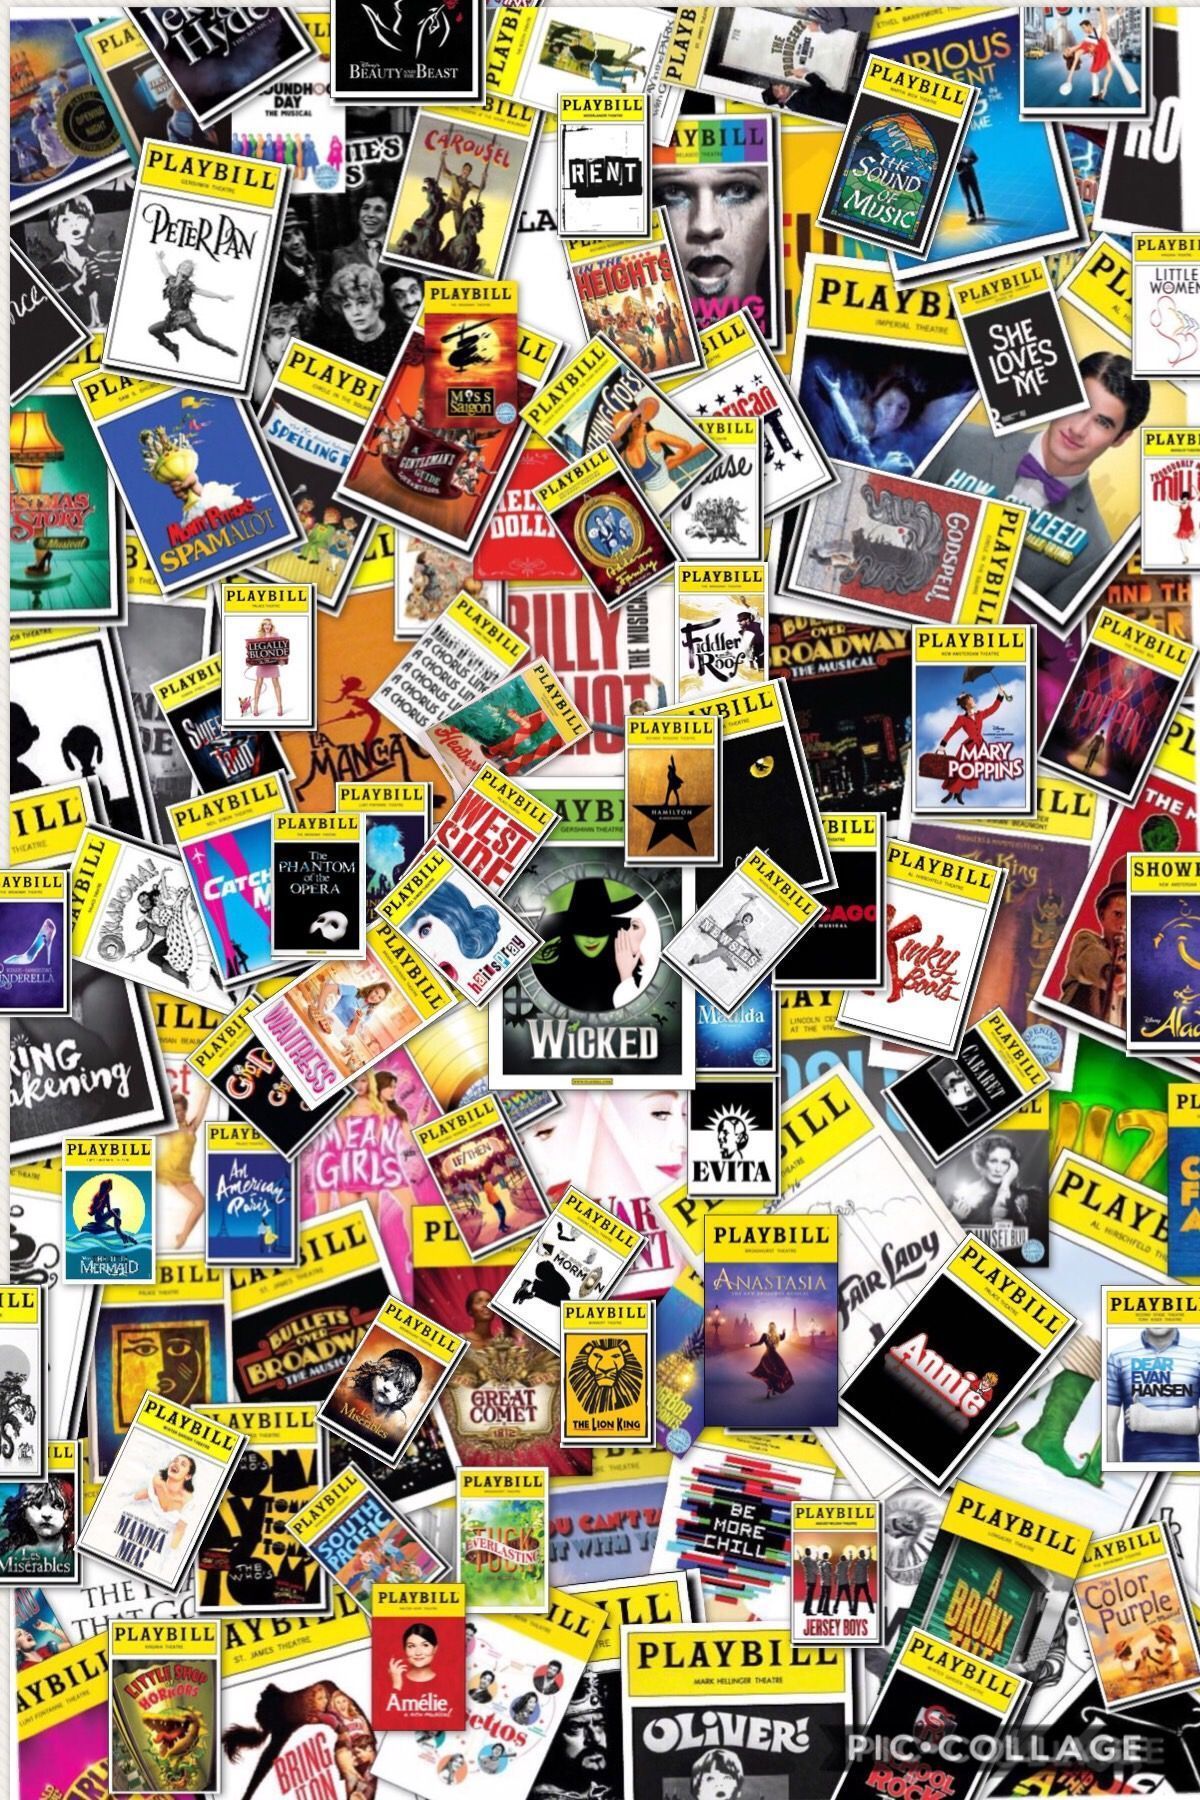 A collage of various playbills - Broadway